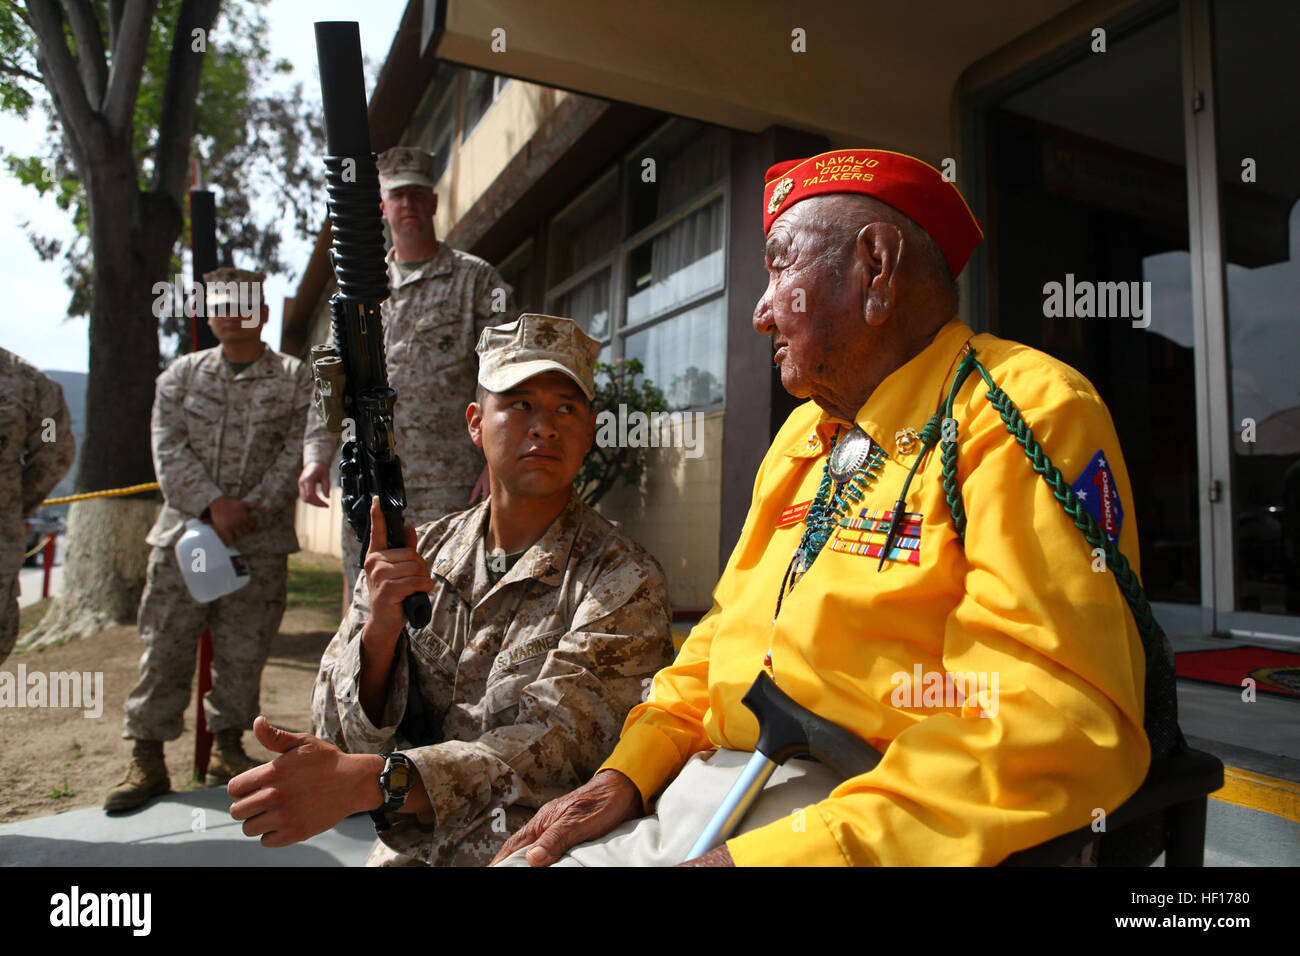 Lance Cpl. Nicholas Kien, a rifleman serving with 2nd Battalion, 5th Marine Regiment, shows Samuel Tsosie, a retired Marine who served as a Navajo Code Talker during World War II, an M16 service rifle here at Camp San Mateo, March 27, 2013. Tsosie's visit to the battalion gave some of the younger Marines an opportunity to learn about an important aspect of the Corp's heritage. Tsosie served with 2nd Bn. 5th Marines, in multiple battles including Peleliu, Okainawa, and Cape Gloucester. Navajo Code Talker visits at old stomping grounds 130327-M-GO800-016 Stock Photo